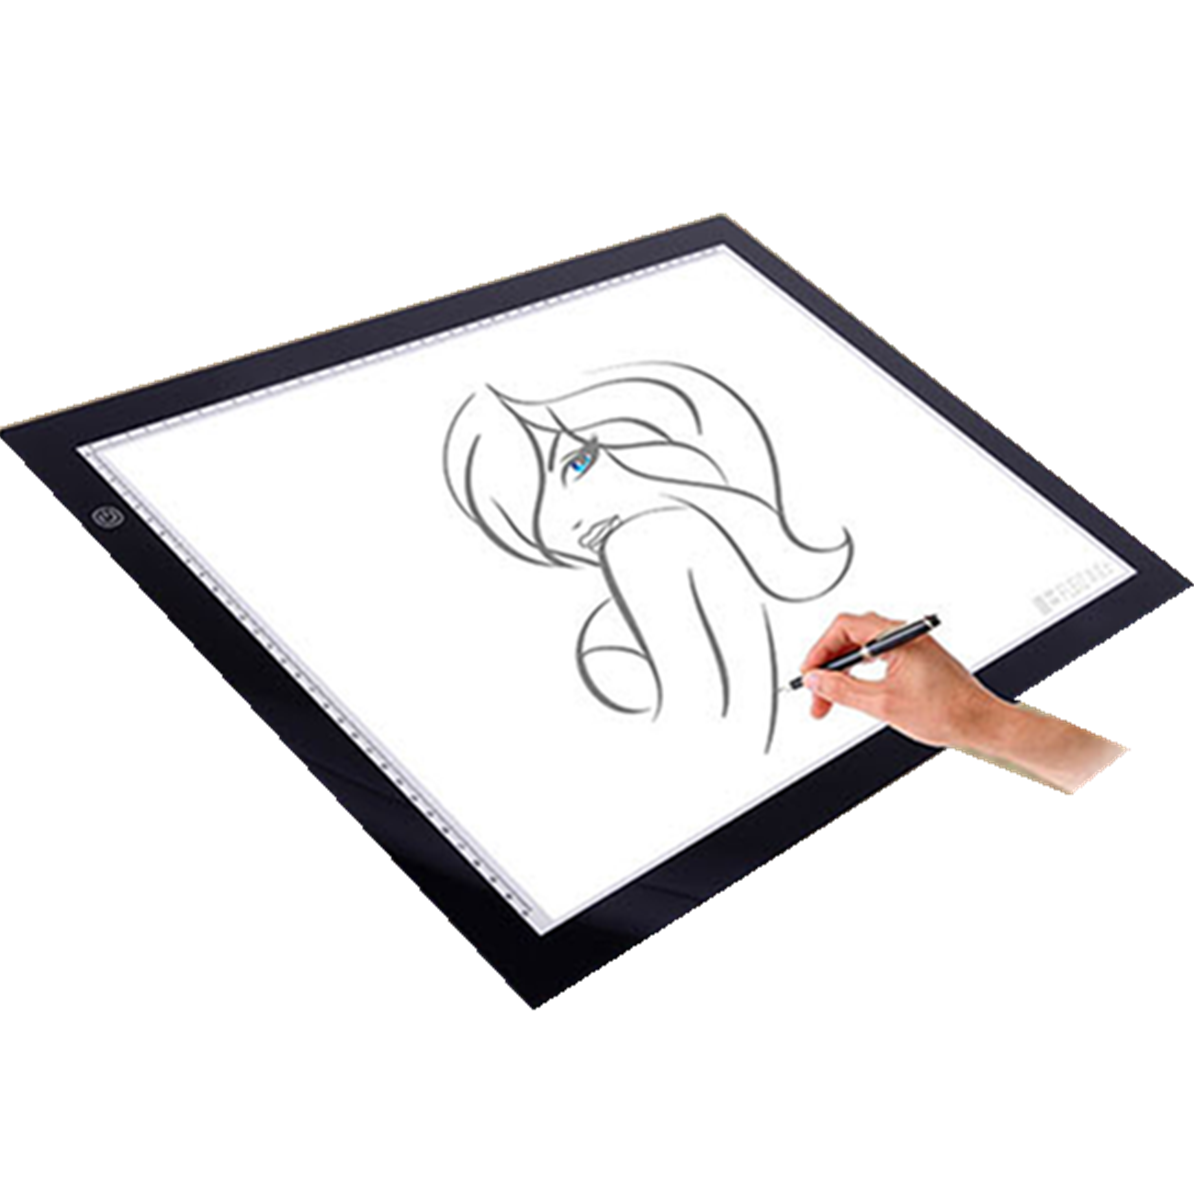 LED Ultra-thin Dimmable Brightness A2 USB Copy Desk Animation Drawing Tracing Stencil Board Table Pad Light Box Drawing Tablet COD